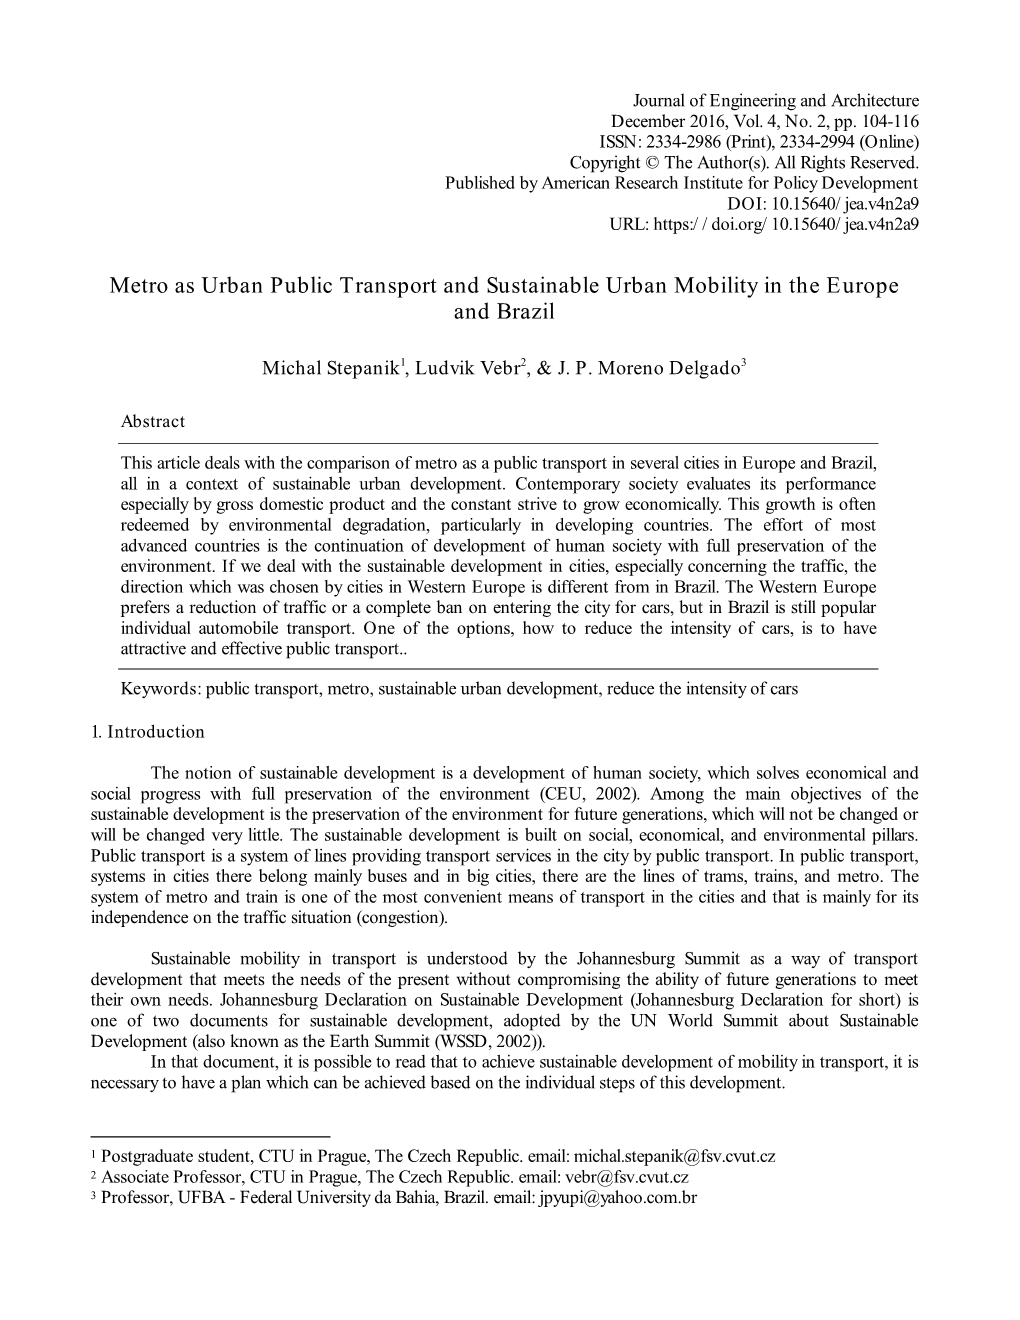 Metro As Urban Public Transport and Sustainable Urban Mobility in the Europe and Brazil